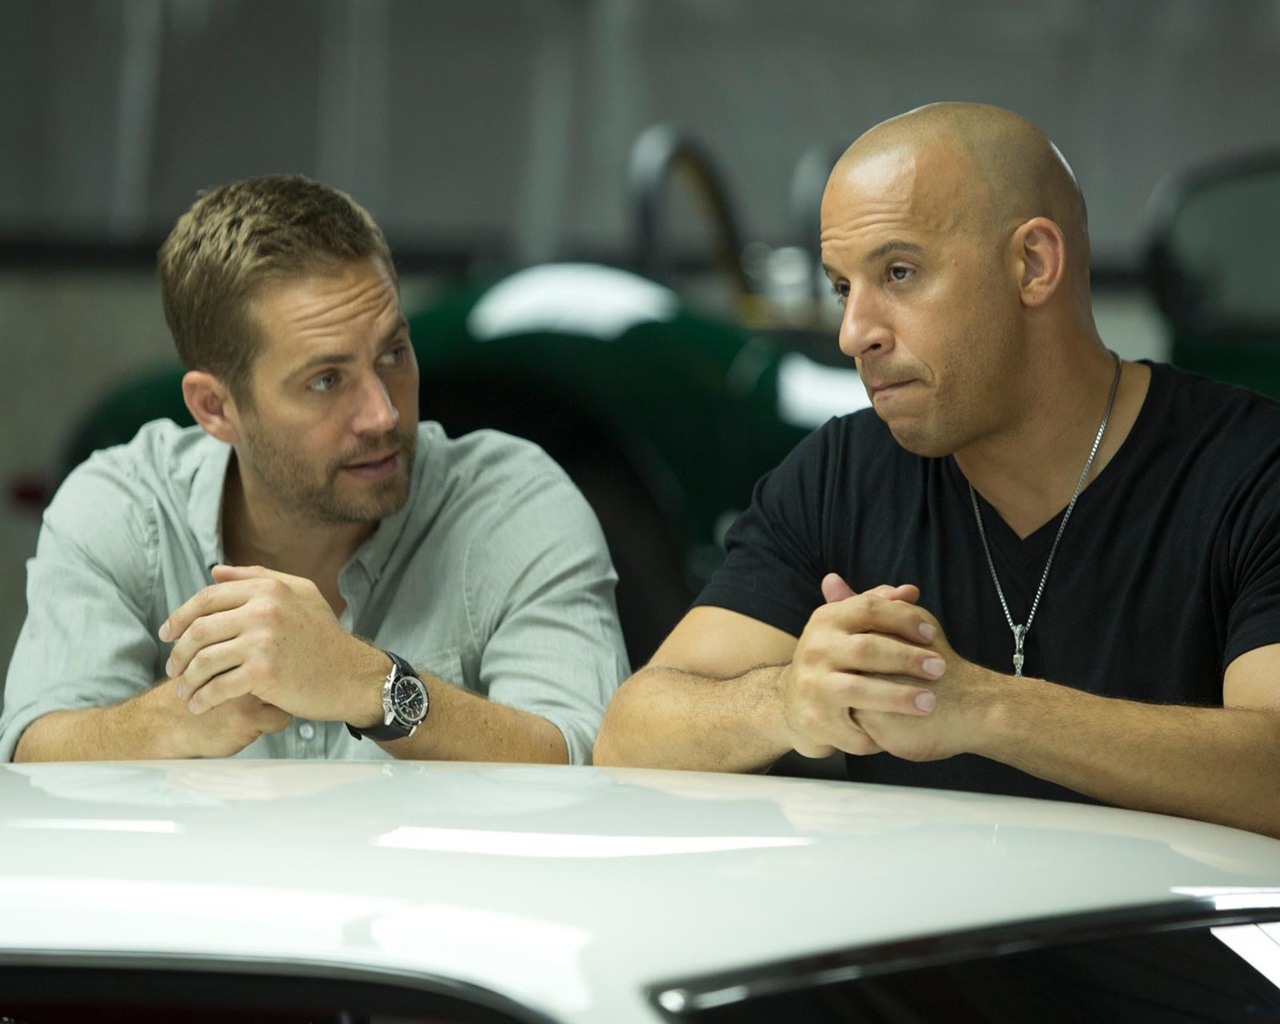 Fast And Furious 6 HD movie wallpapers #8 - 1280x1024